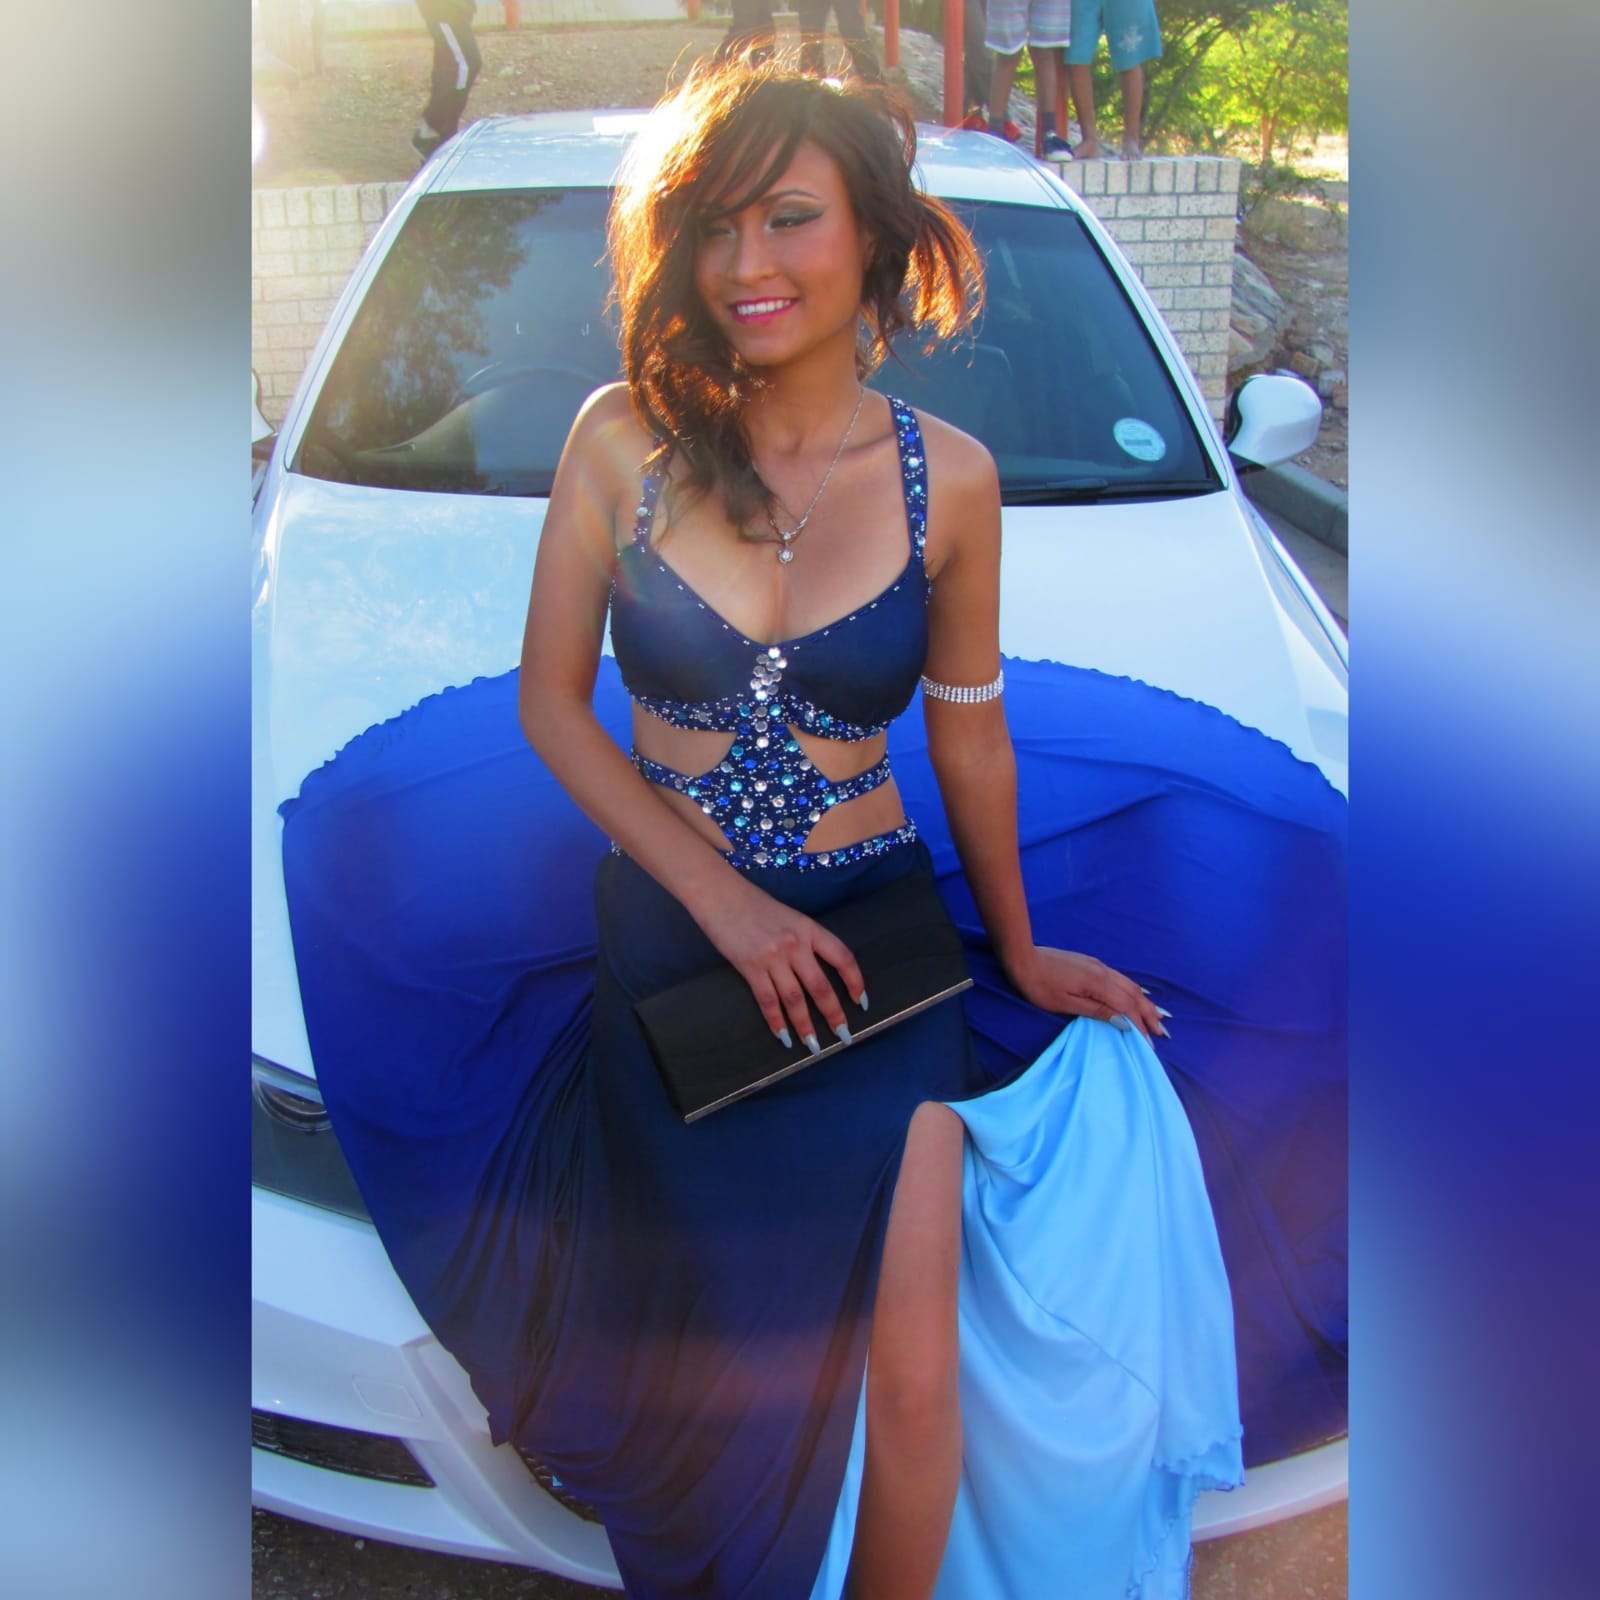 Royal blue and navy blue ombre sexy matric dance dress 3 royal blue and navy blue ombre sexy matric dance dress. With a slit and a train. With tummy and back openings detailed with silver, blue and turquoise beads.